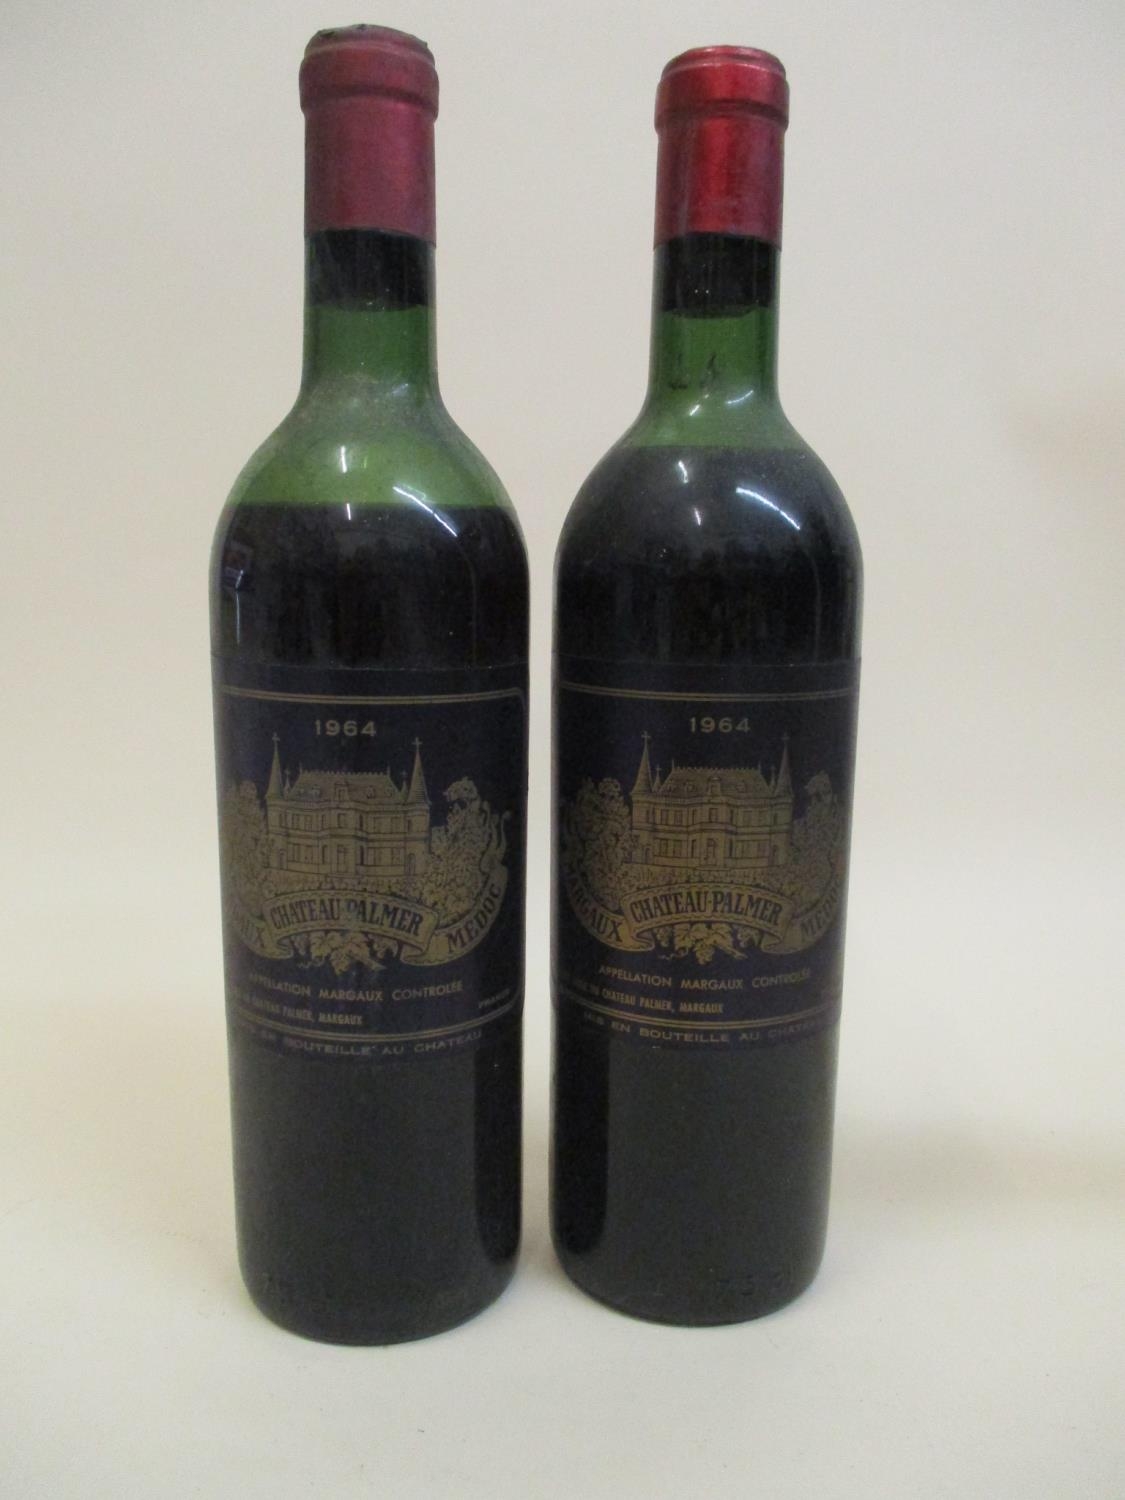 Two bottles of Chateau Palmer 1964 Margaux Medoc Location: L.4